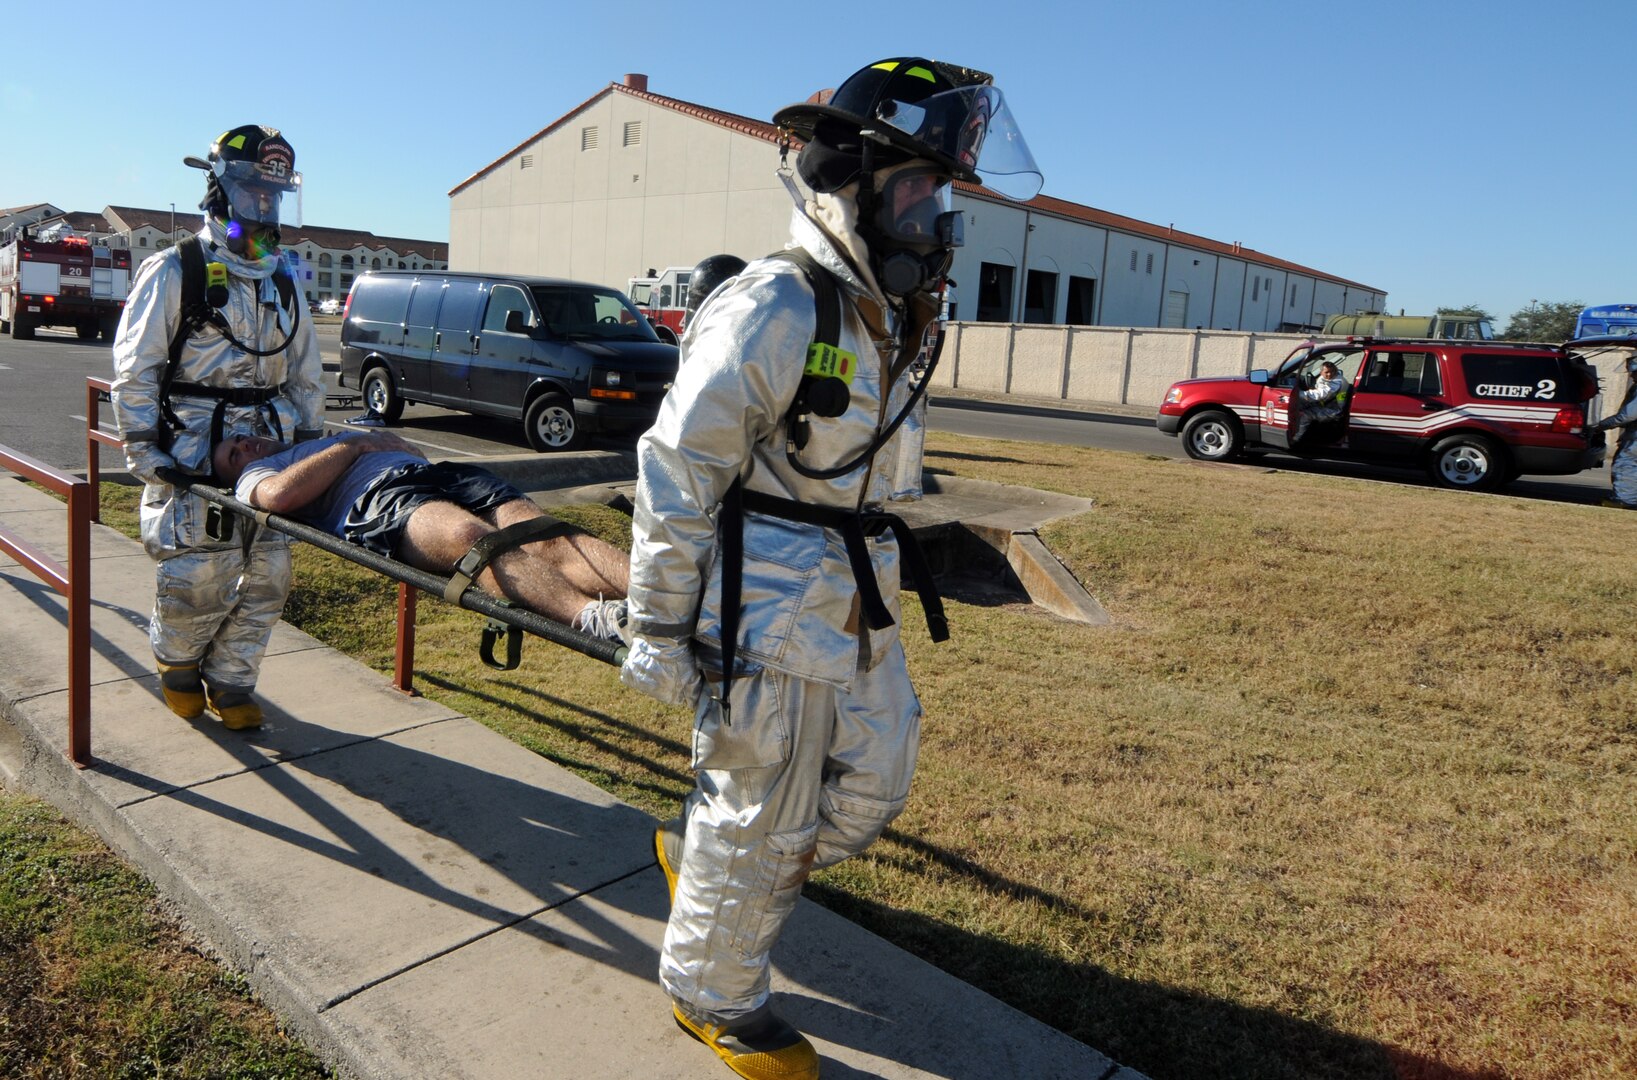 Firefighters carry a simulated victim during the exercise portion of the 2008 Operational Readiness Inspection at Randolph Air Force Base, Texas. (U.S. Air Force photo by Steve White)